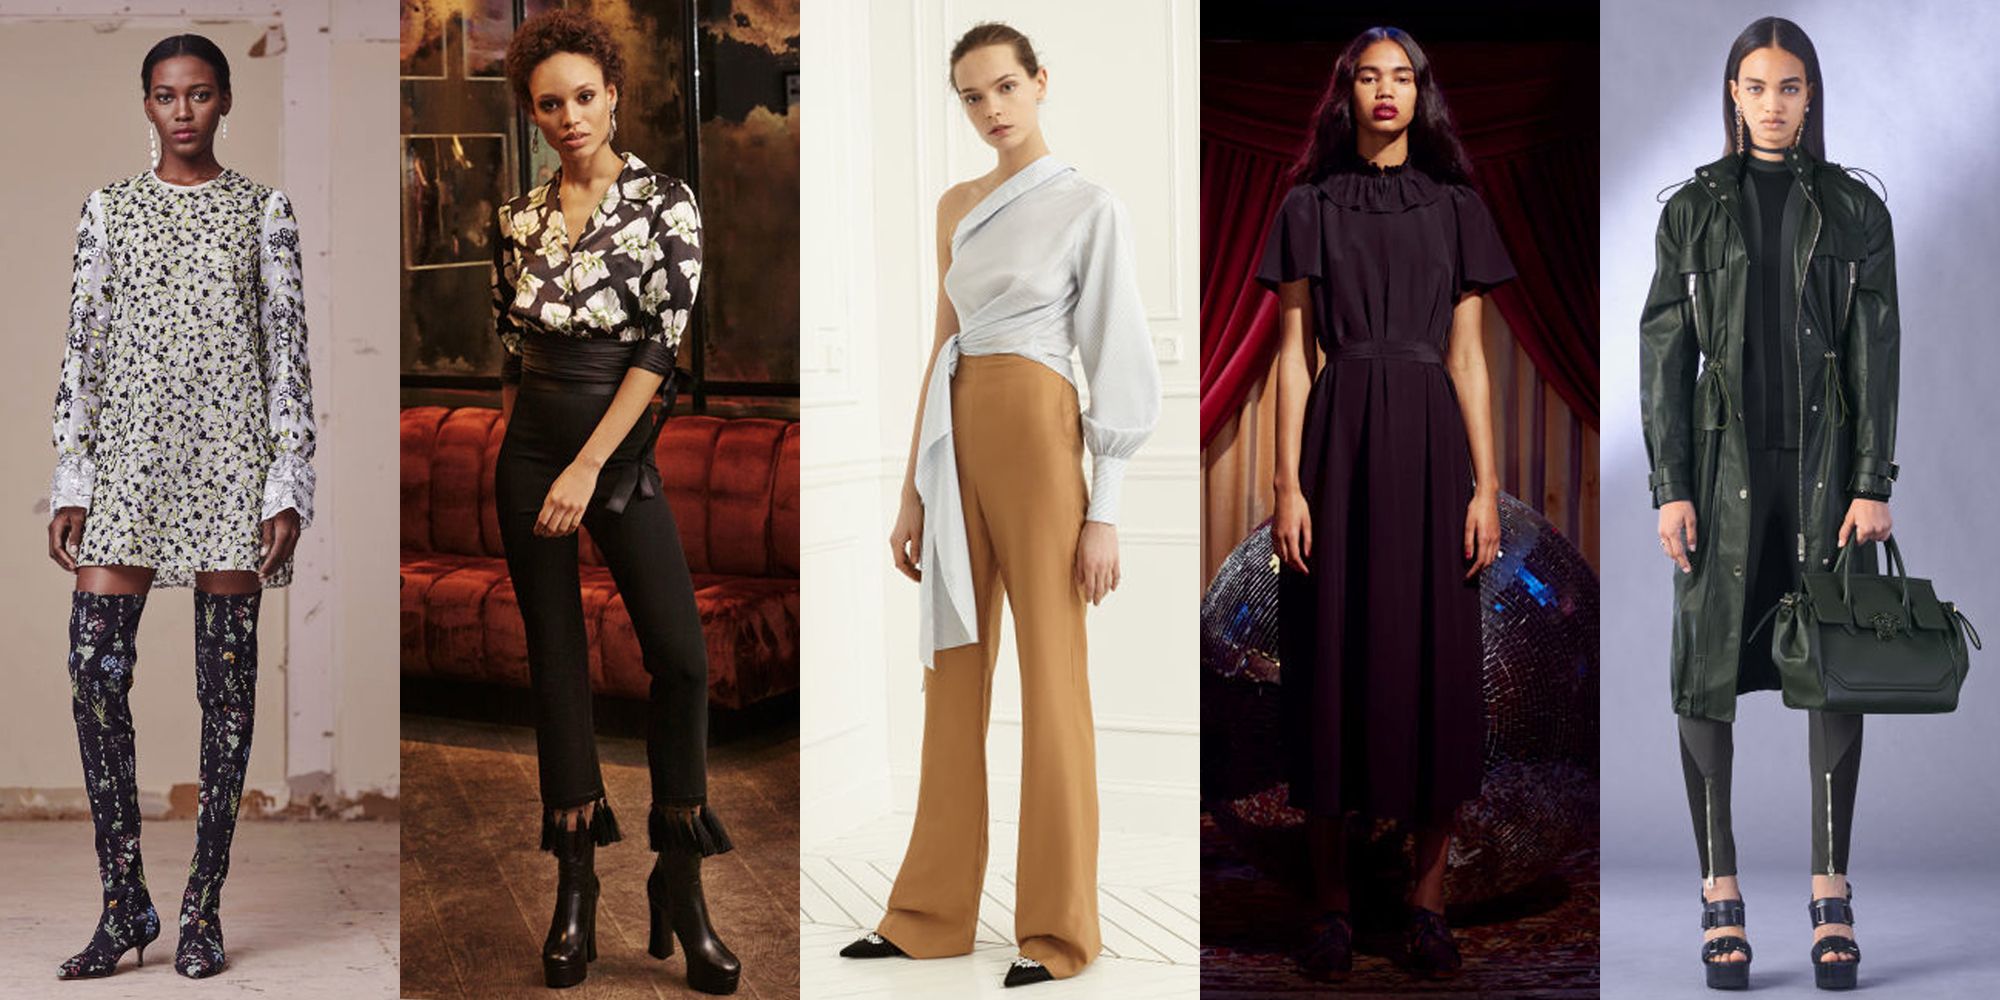 10 Styling Tips We Learned from the Pre-Fall 2017 Collections